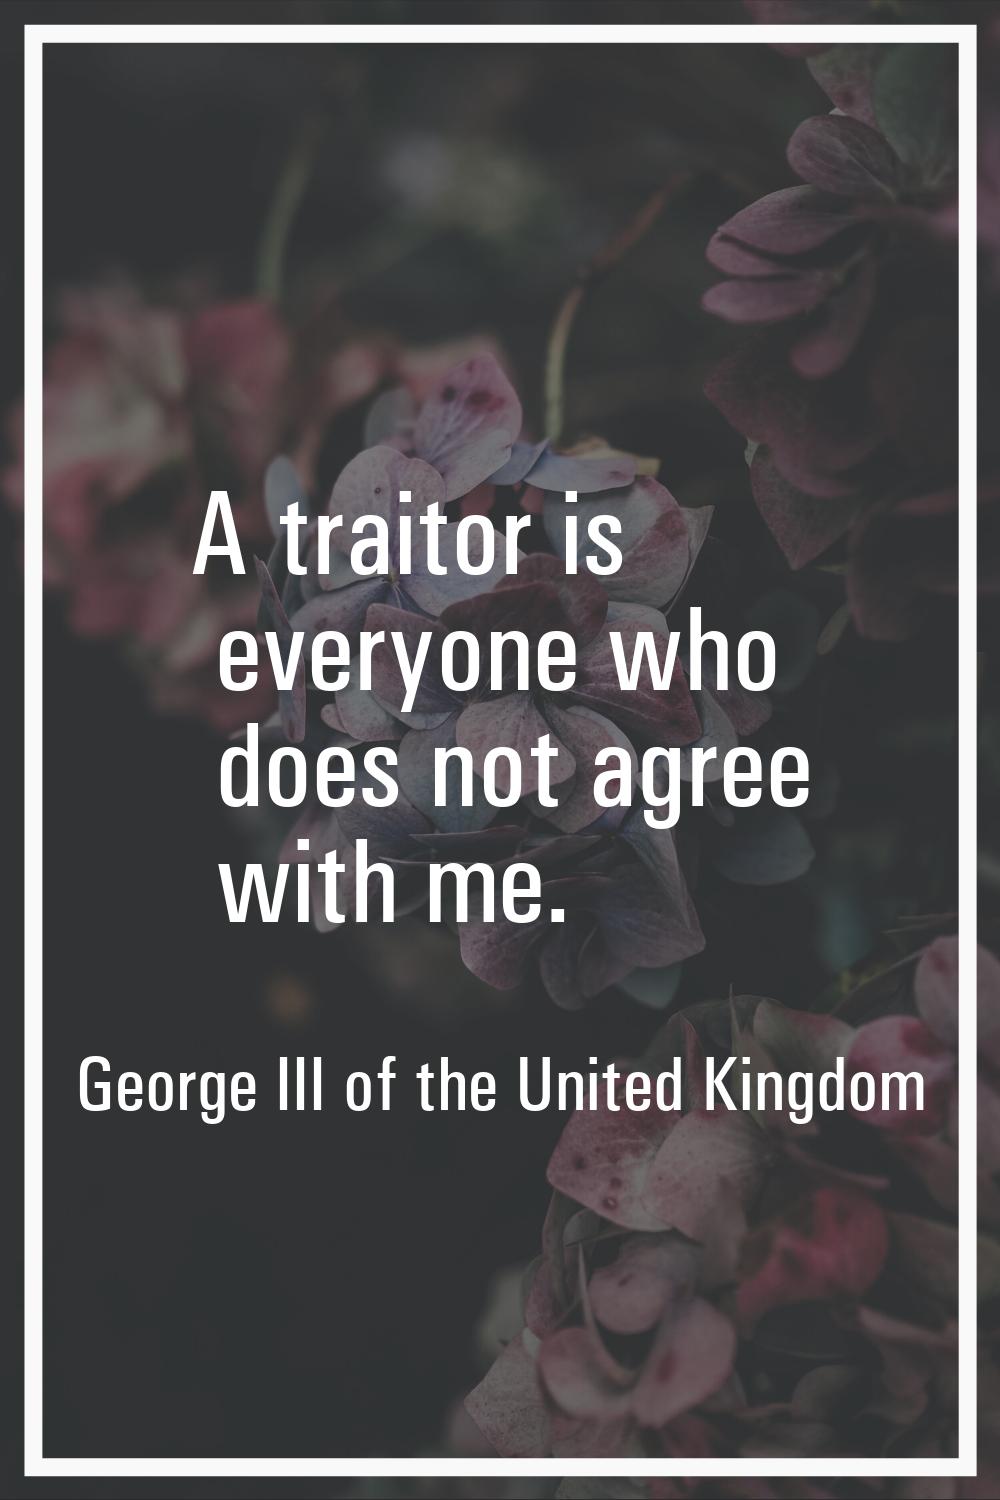 A traitor is everyone who does not agree with me.